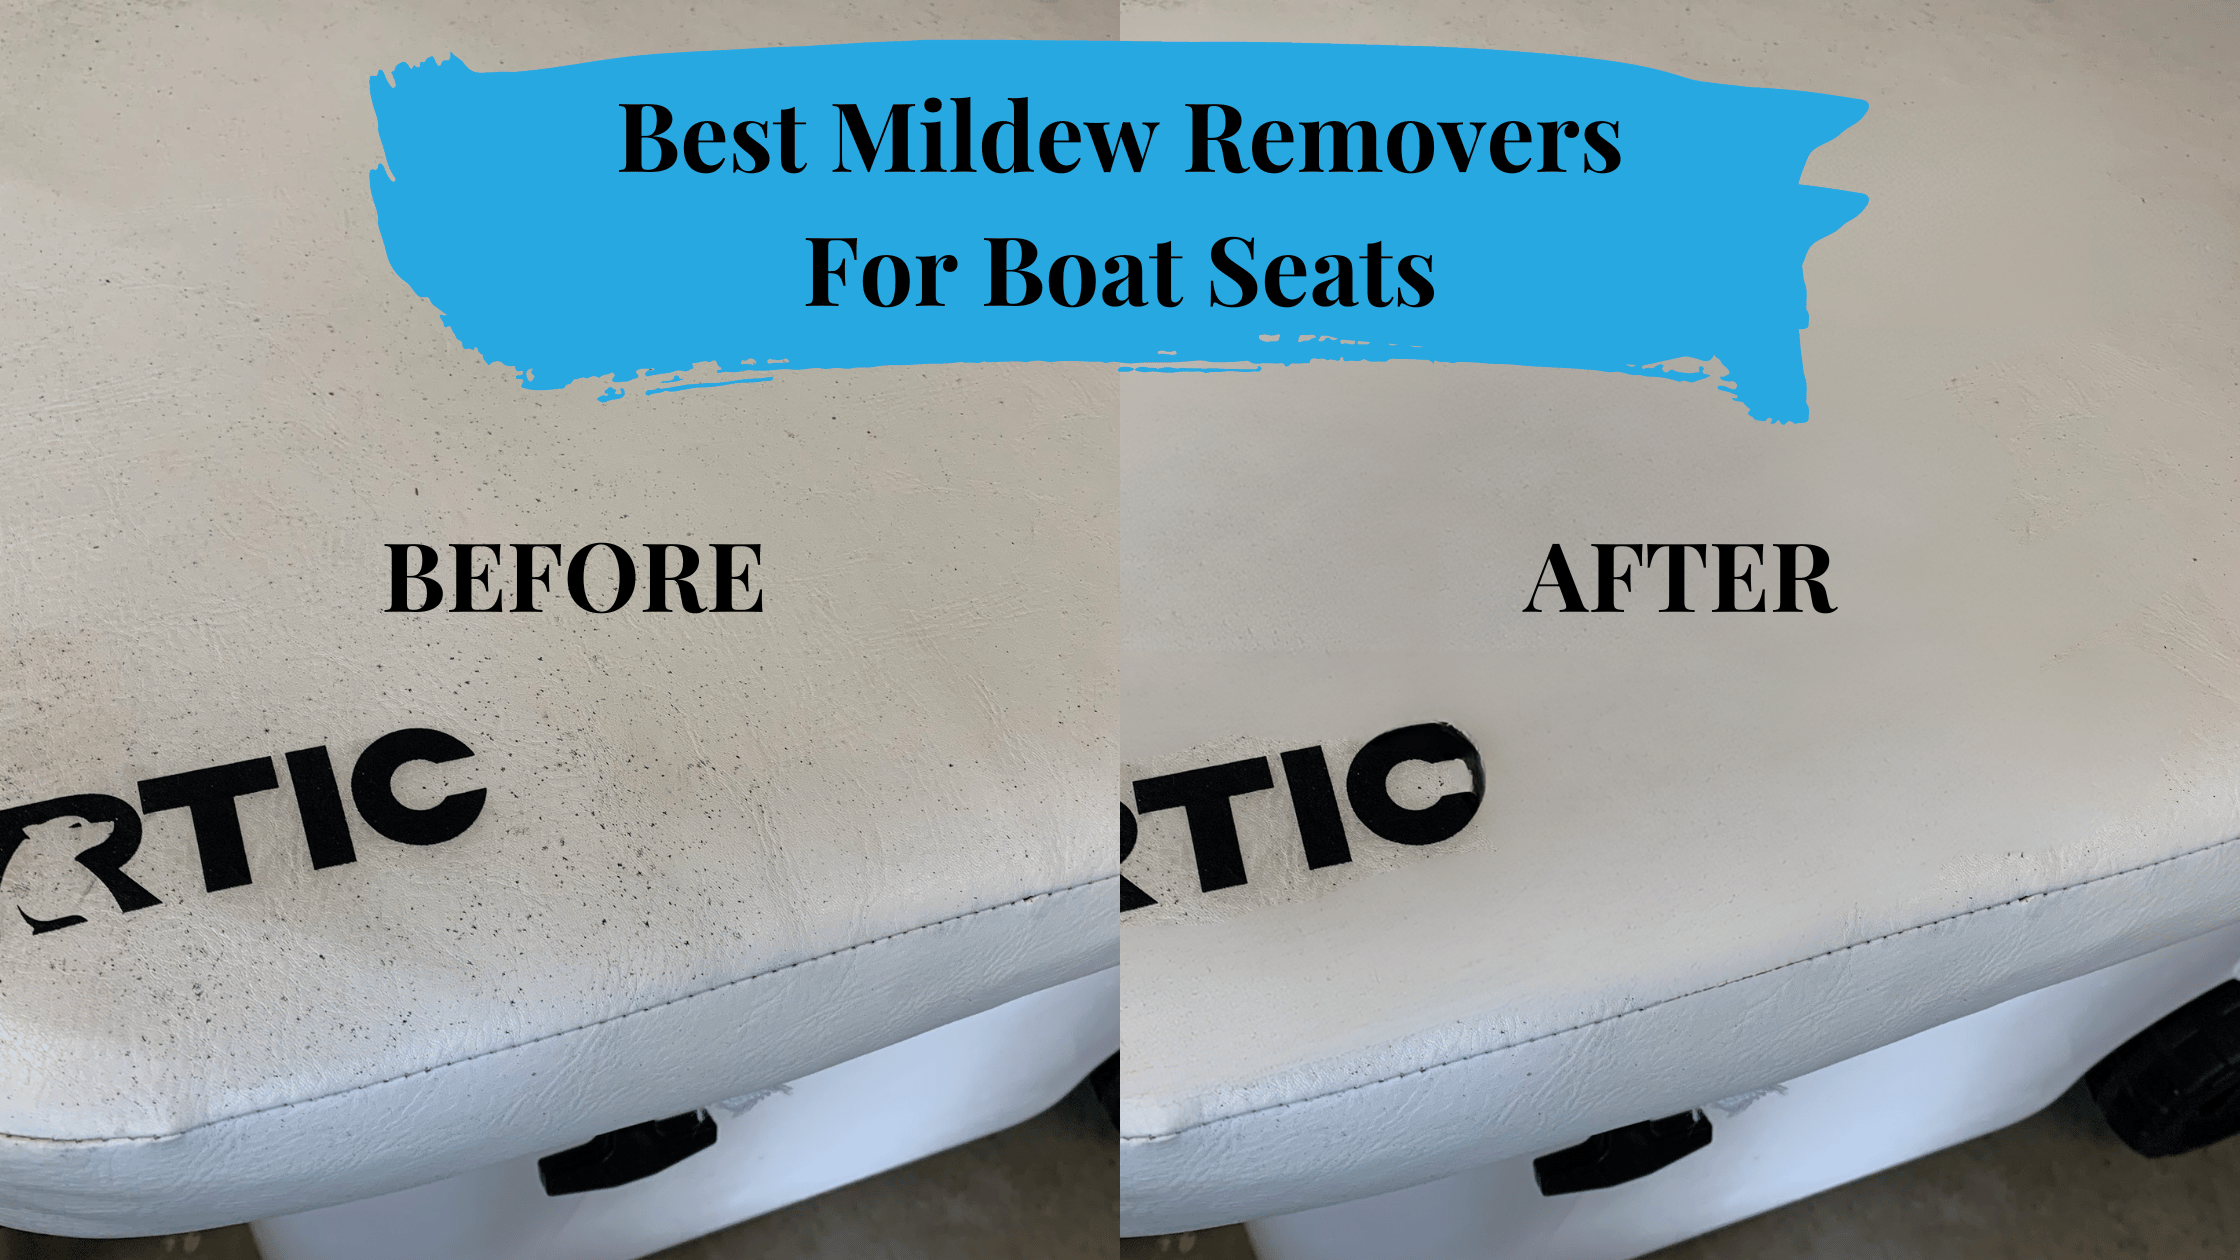 Best Mildew Removers For Boat Seats